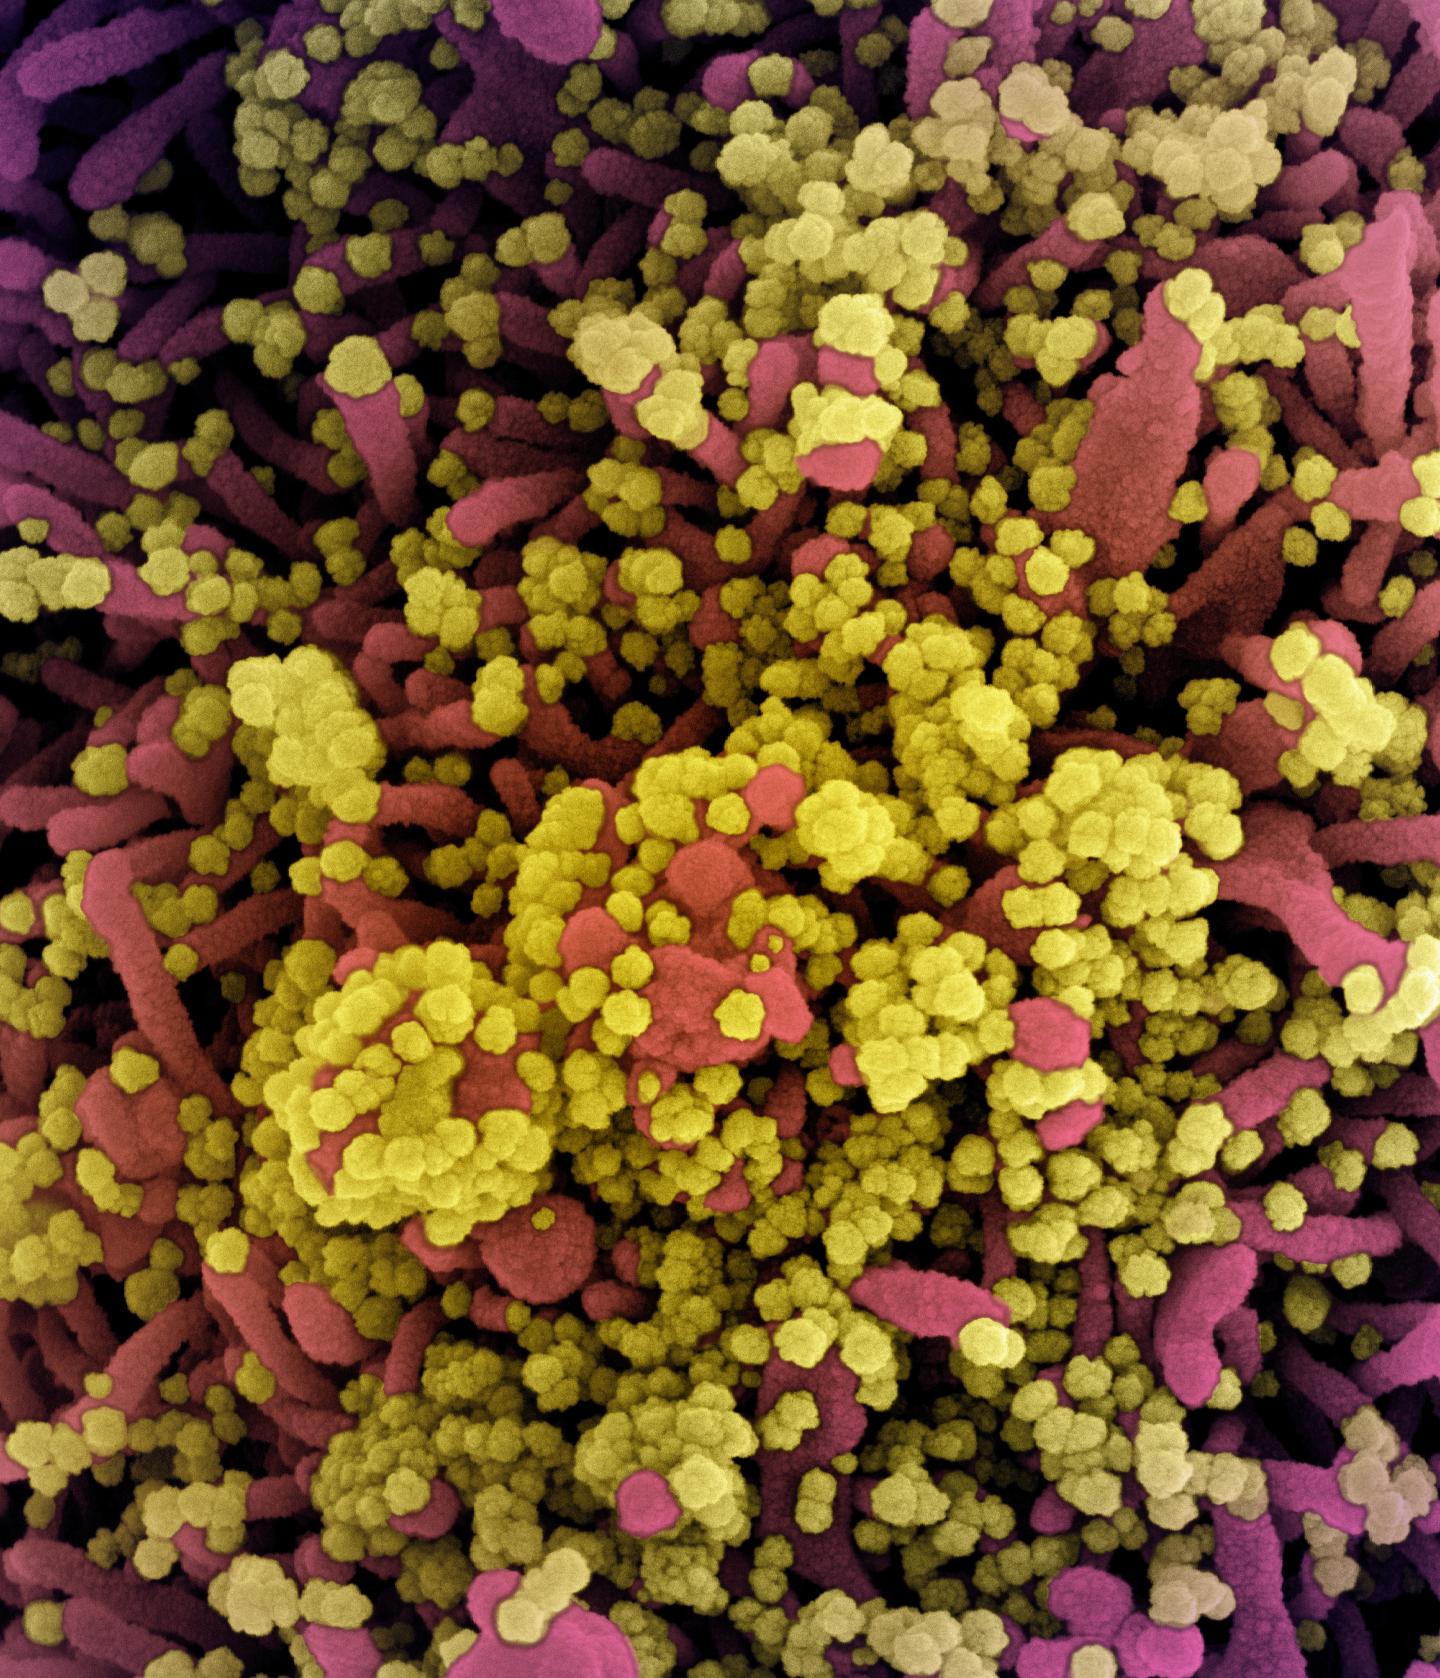 scanning electron micrograph of a cell heavily infected with SARS-CoV-2 virus particles